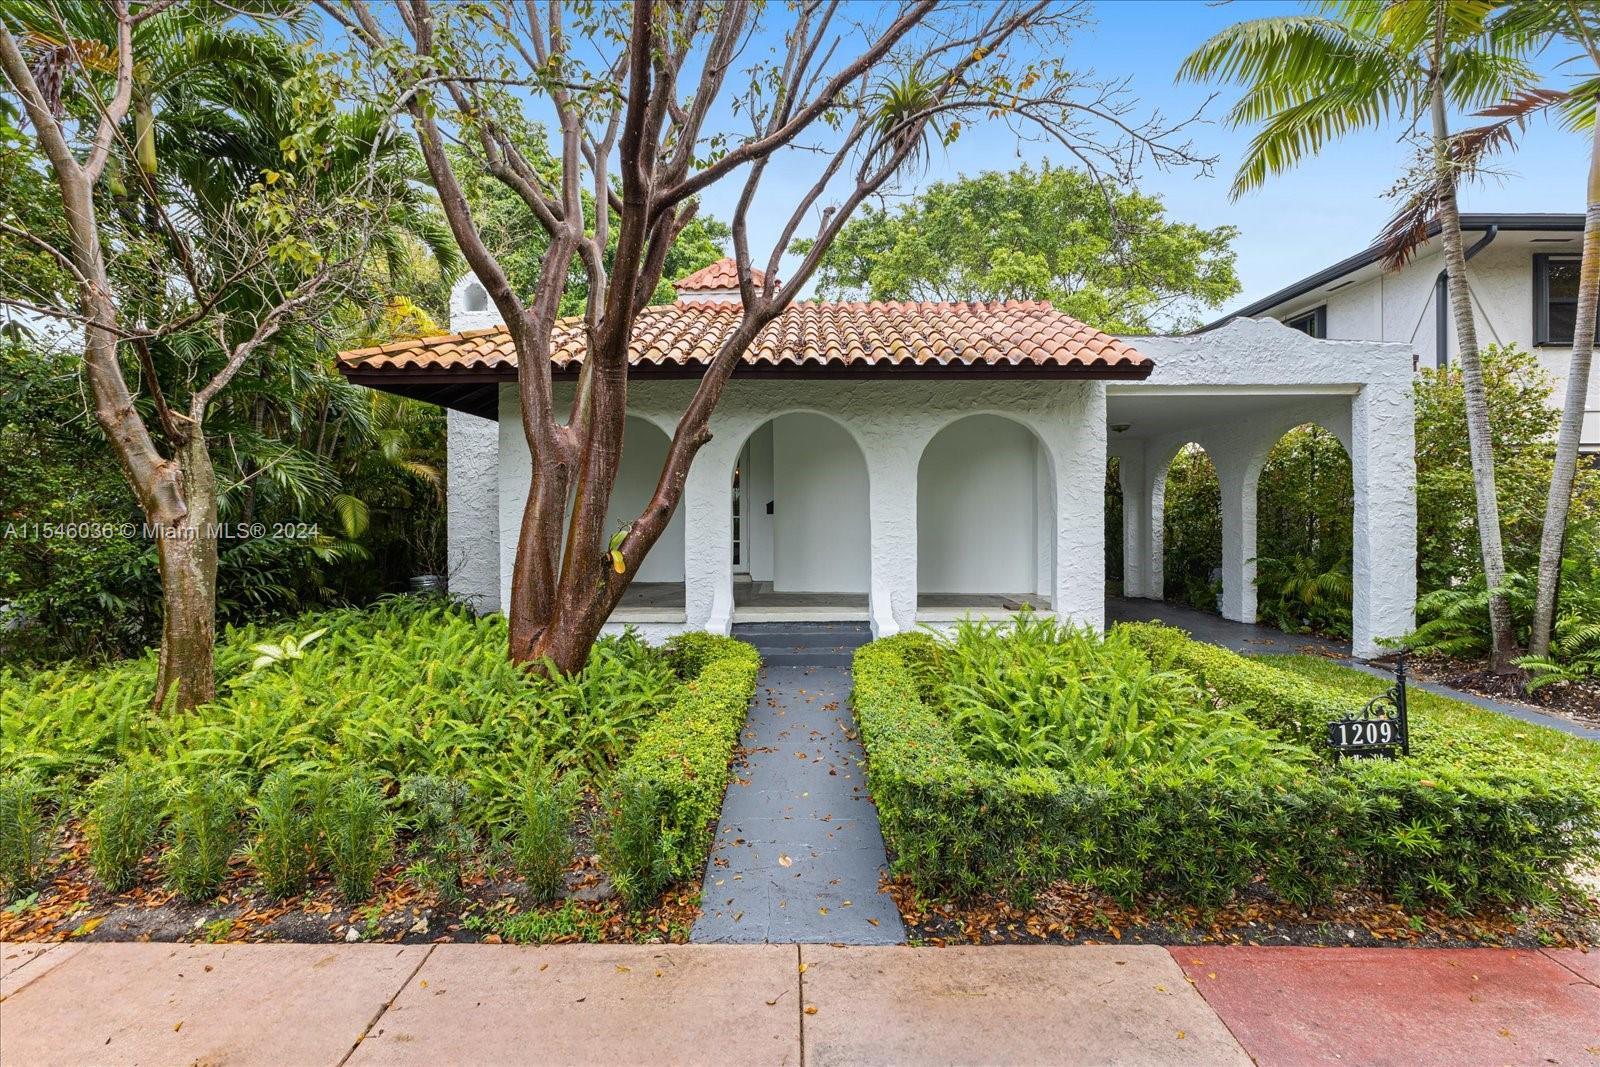 Photo of 1209 San Miguel Ave in Coral Gables, FL